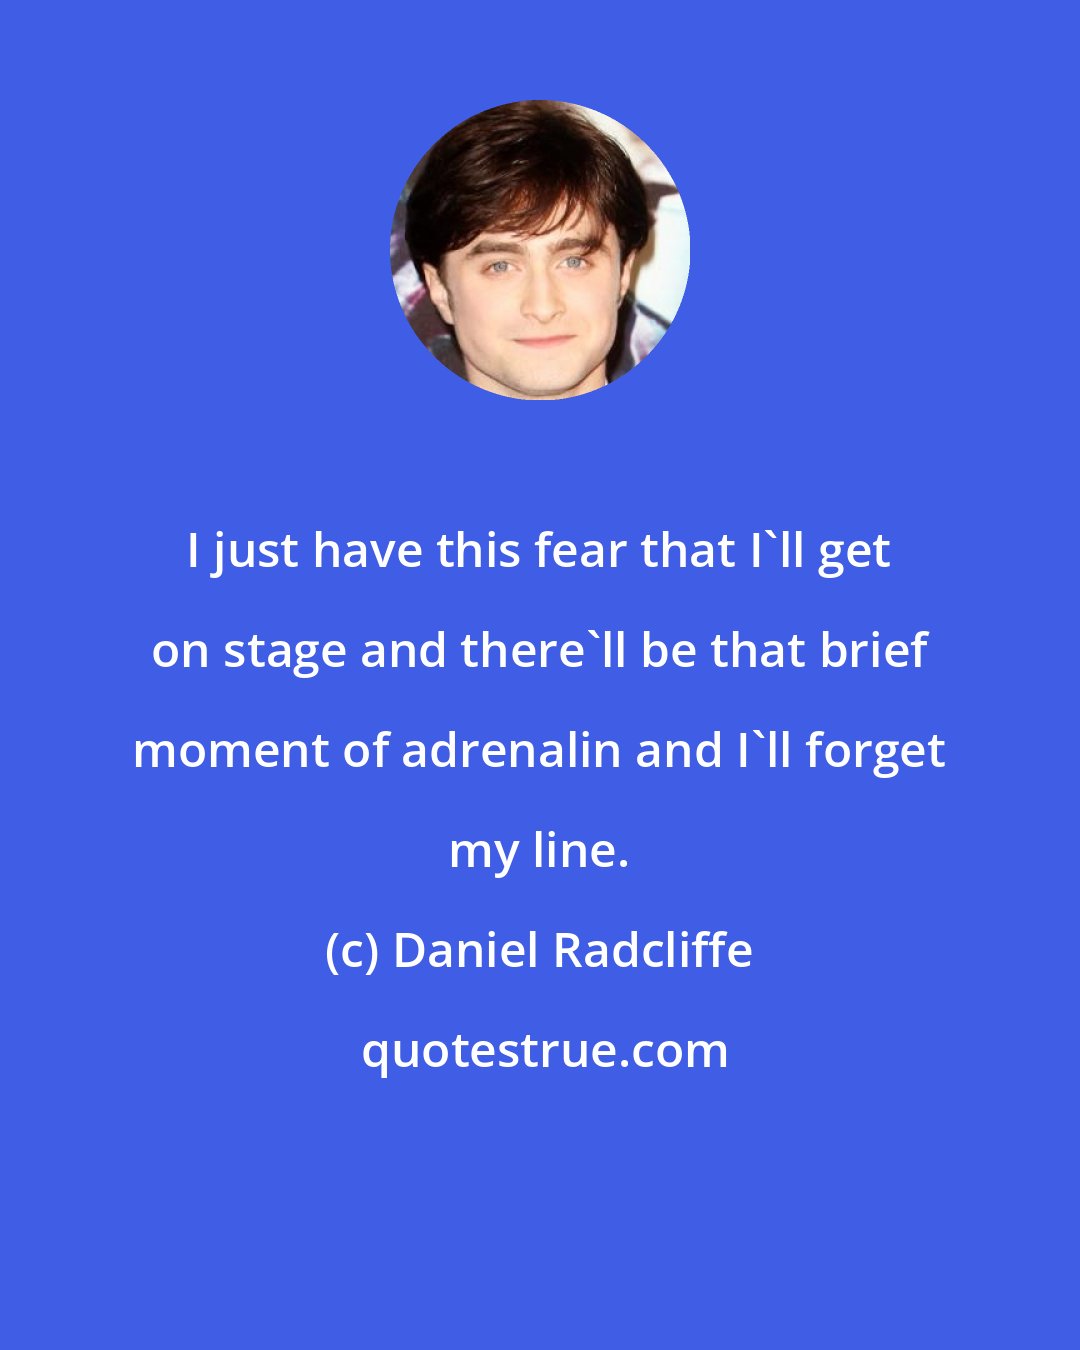 Daniel Radcliffe: I just have this fear that I'll get on stage and there'll be that brief moment of adrenalin and I'll forget my line.